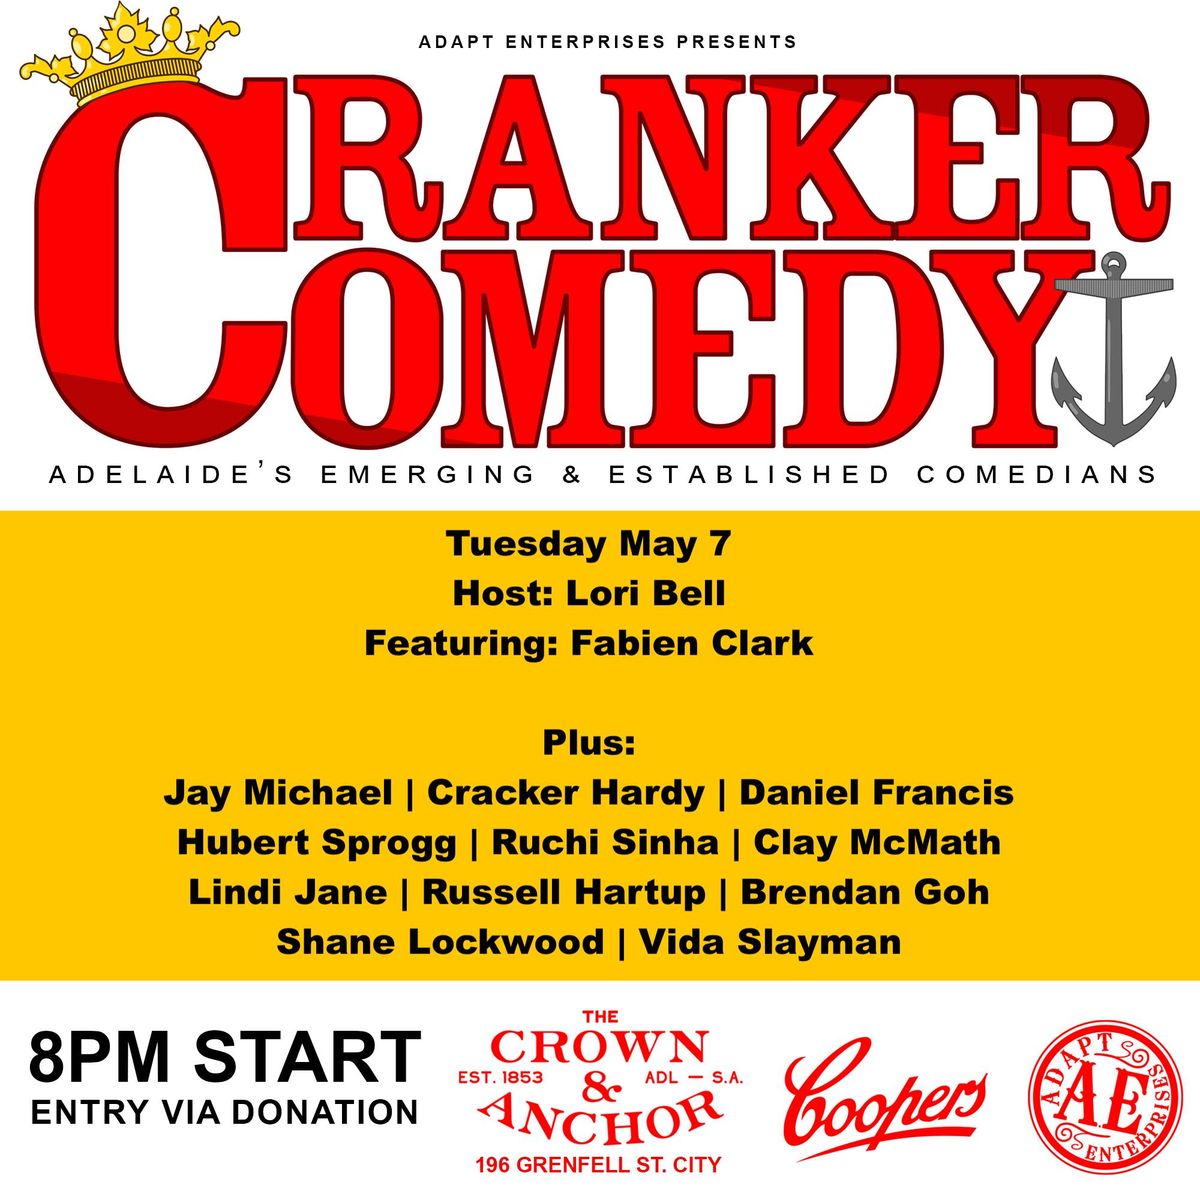 Cranker Comedy Tues May 7